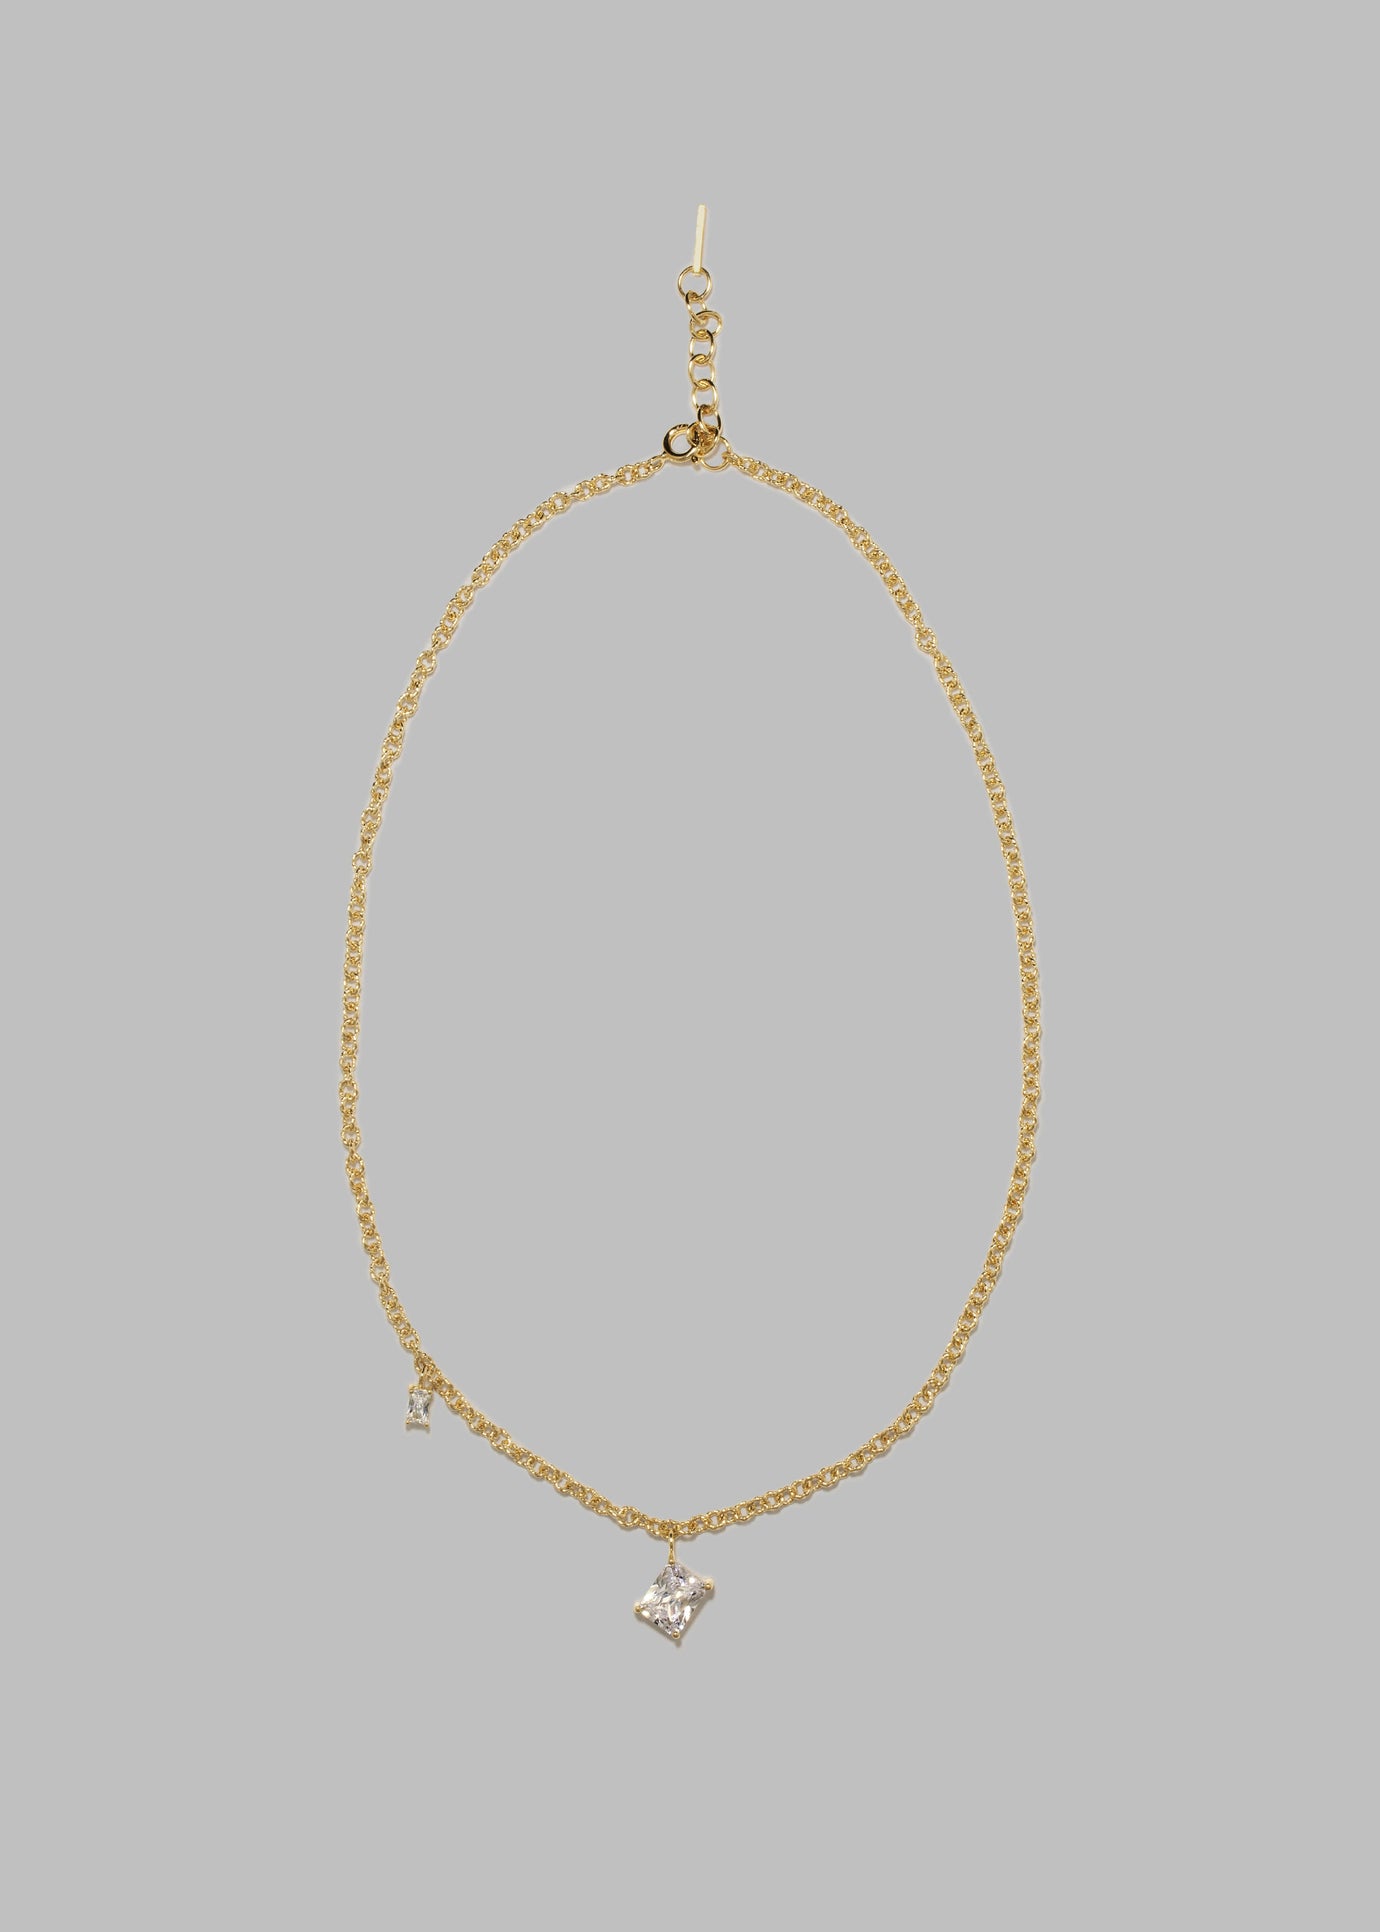 Completedworks Encrypted Dreams Necklace - Cubic Zirconia/Gold Vermeil - 1